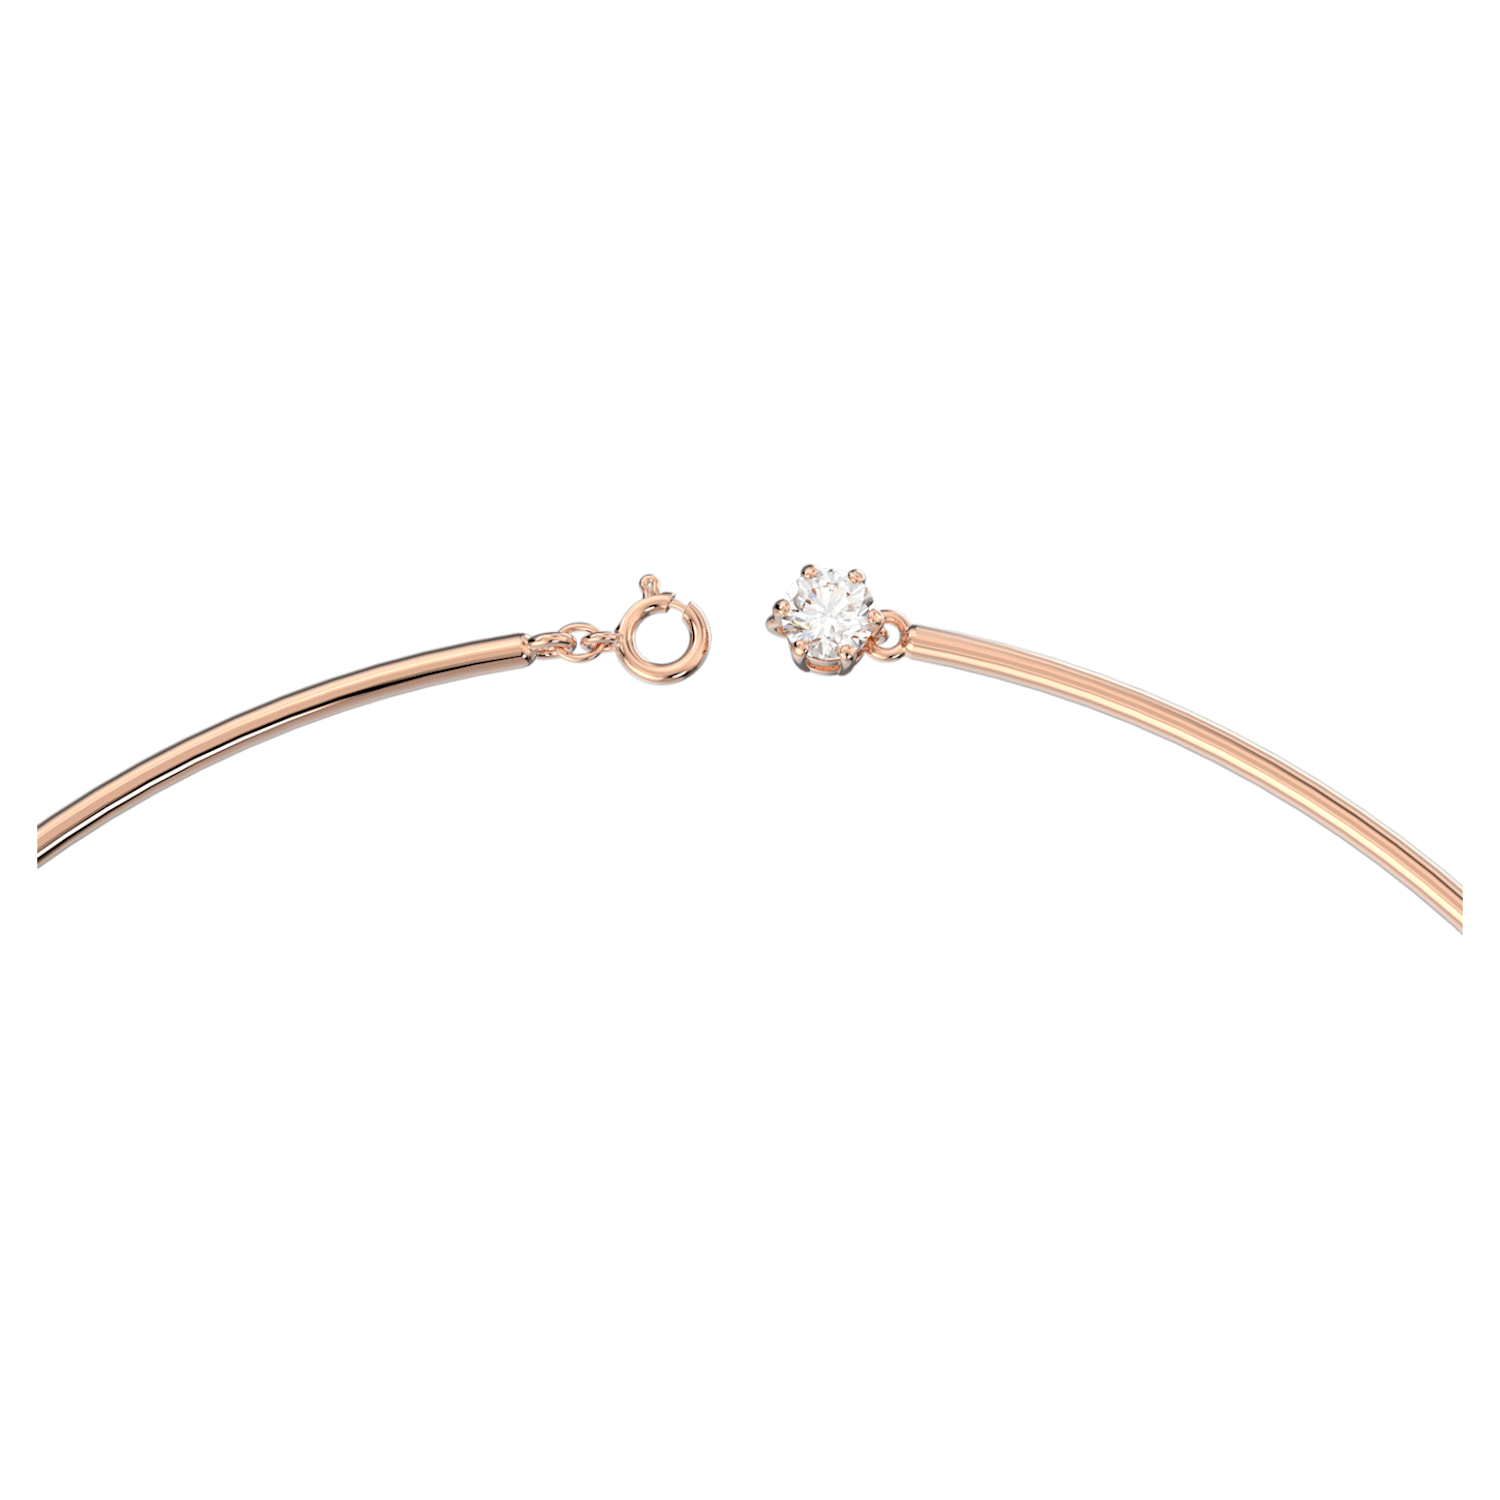 Constella necklace, Round cut, White, Rose gold-tone plated 